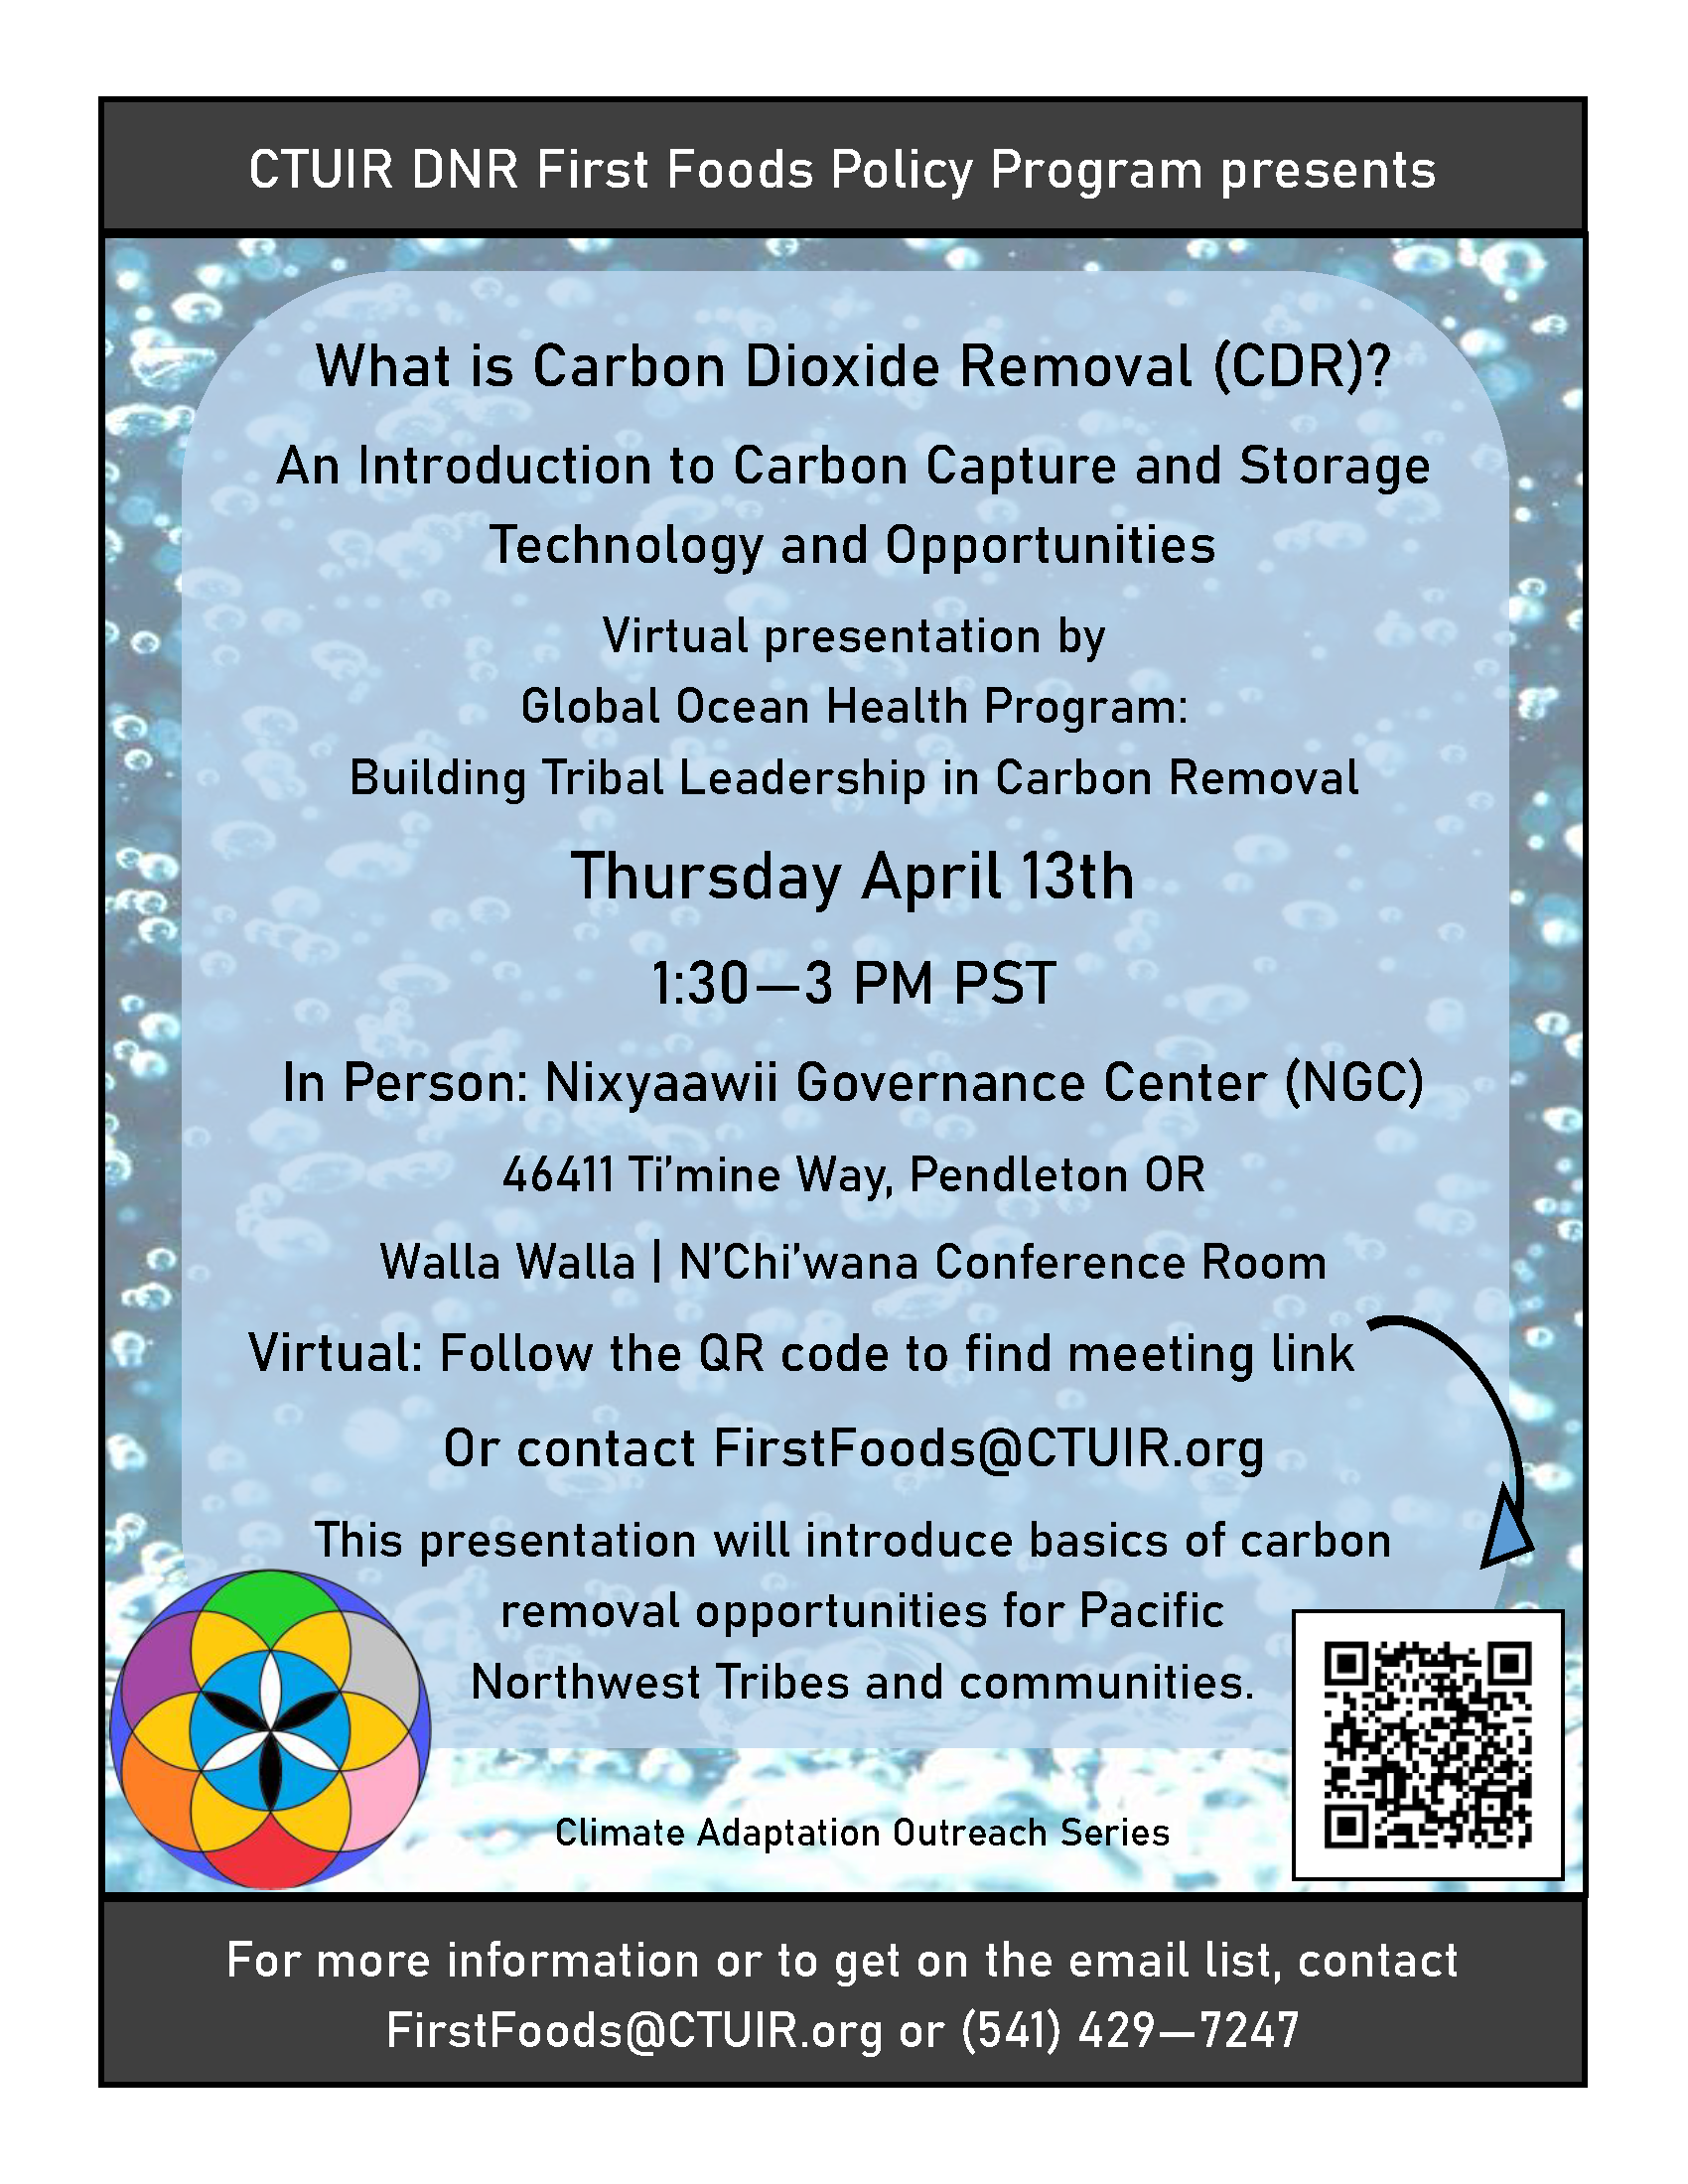 a flyer for an event about carbon dioxide removal (CDR) technologies and opportunities held on April 13th 1:30 to 3 PM